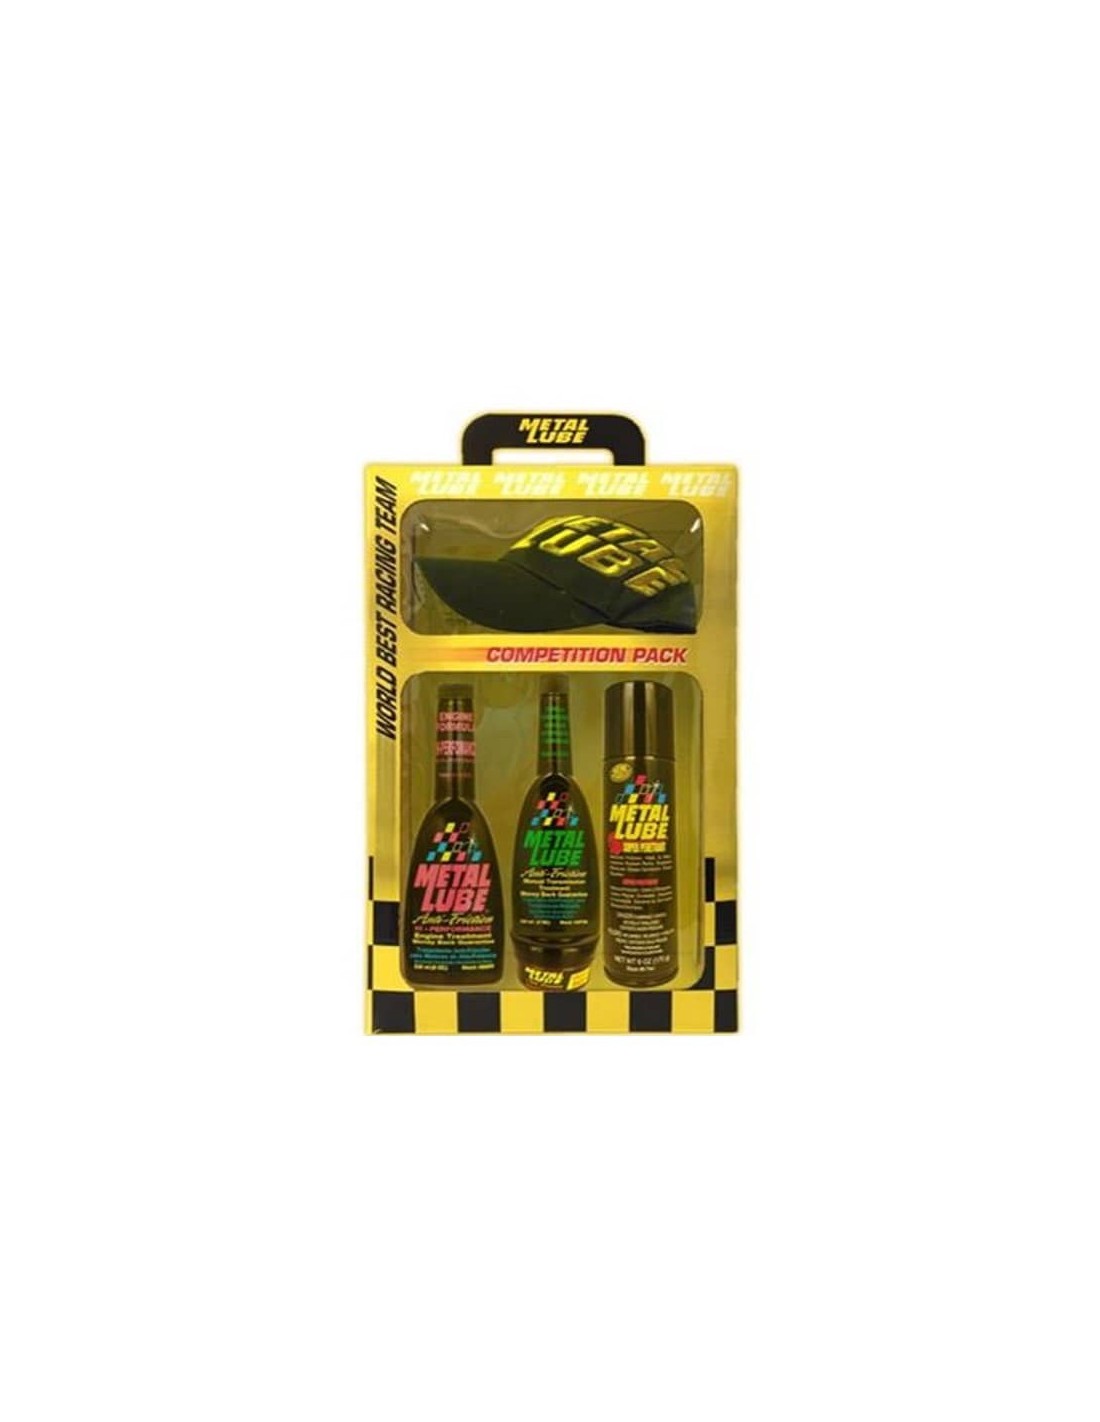 Pack Competicion Metal Lube104,99 euros€ 